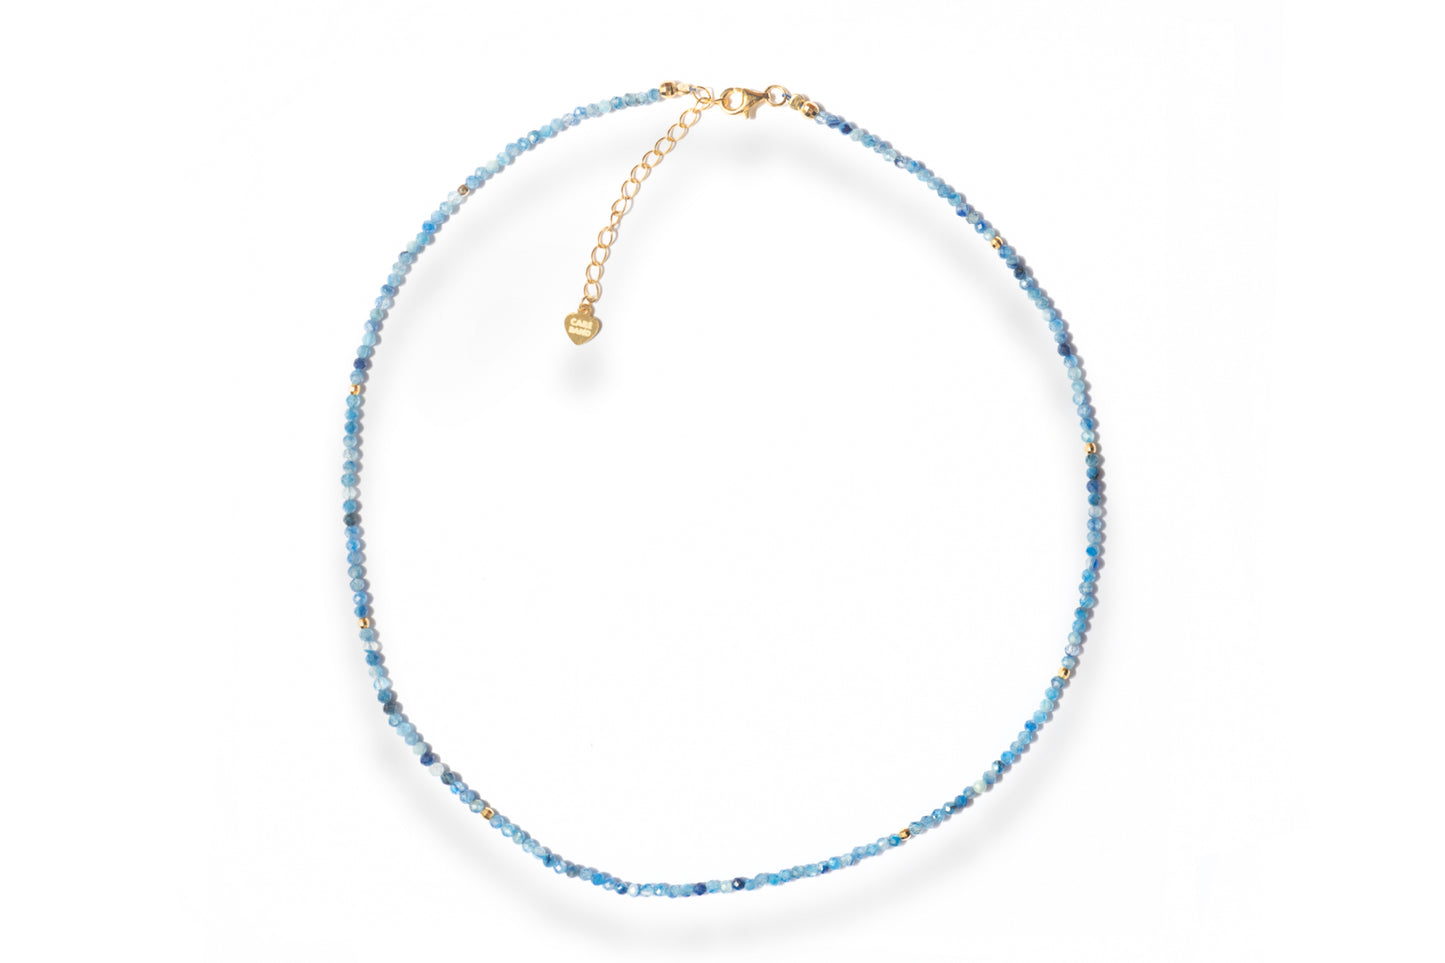 Care Band Blue Kyanite Faceted Necklace